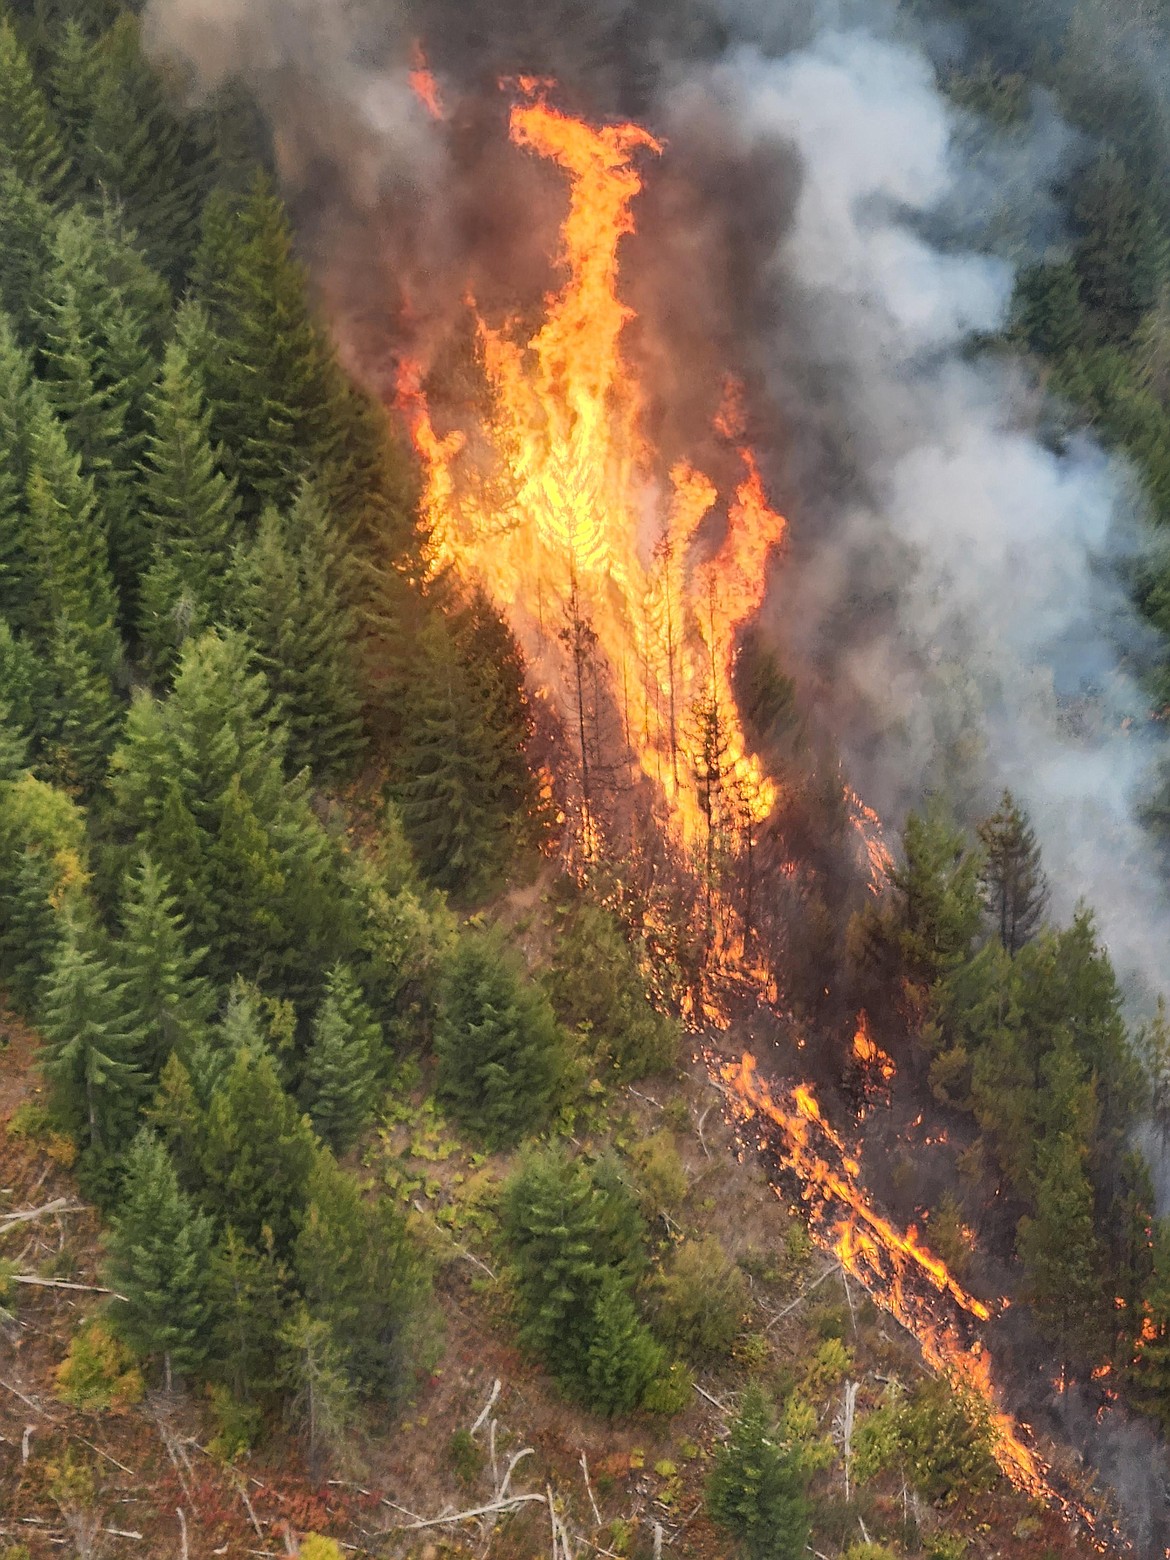 North Idaho has received ash and smoke from prescribed burns in Montana that were ignited Thursday. This aerial photo shows the Elk/Gem prescribed fire in the Cabinet Ranger District of the Kootenai National Forest. Burning objectives include improving the quality, quantity and distribution of forage for big game species; reducing the risk of uncharacteristic fire behavior in the event of wildfire; and reducing slash created in recent logging operations.